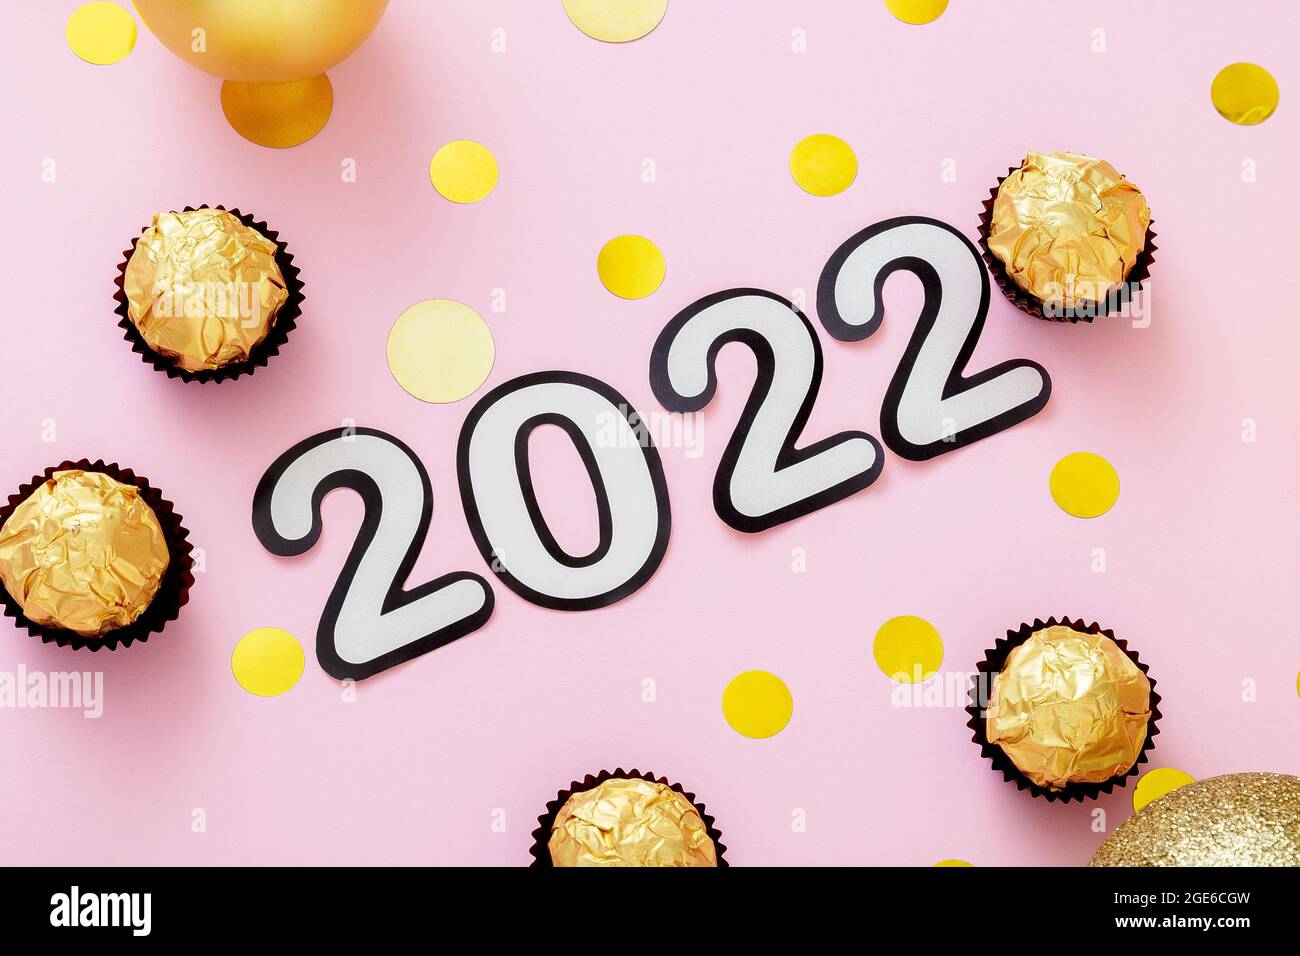 2022 text with Christmas decorations candies Sweets gold confetti on pink color background. Goals 2022 lettering in Happy New Year style. Stock Photo